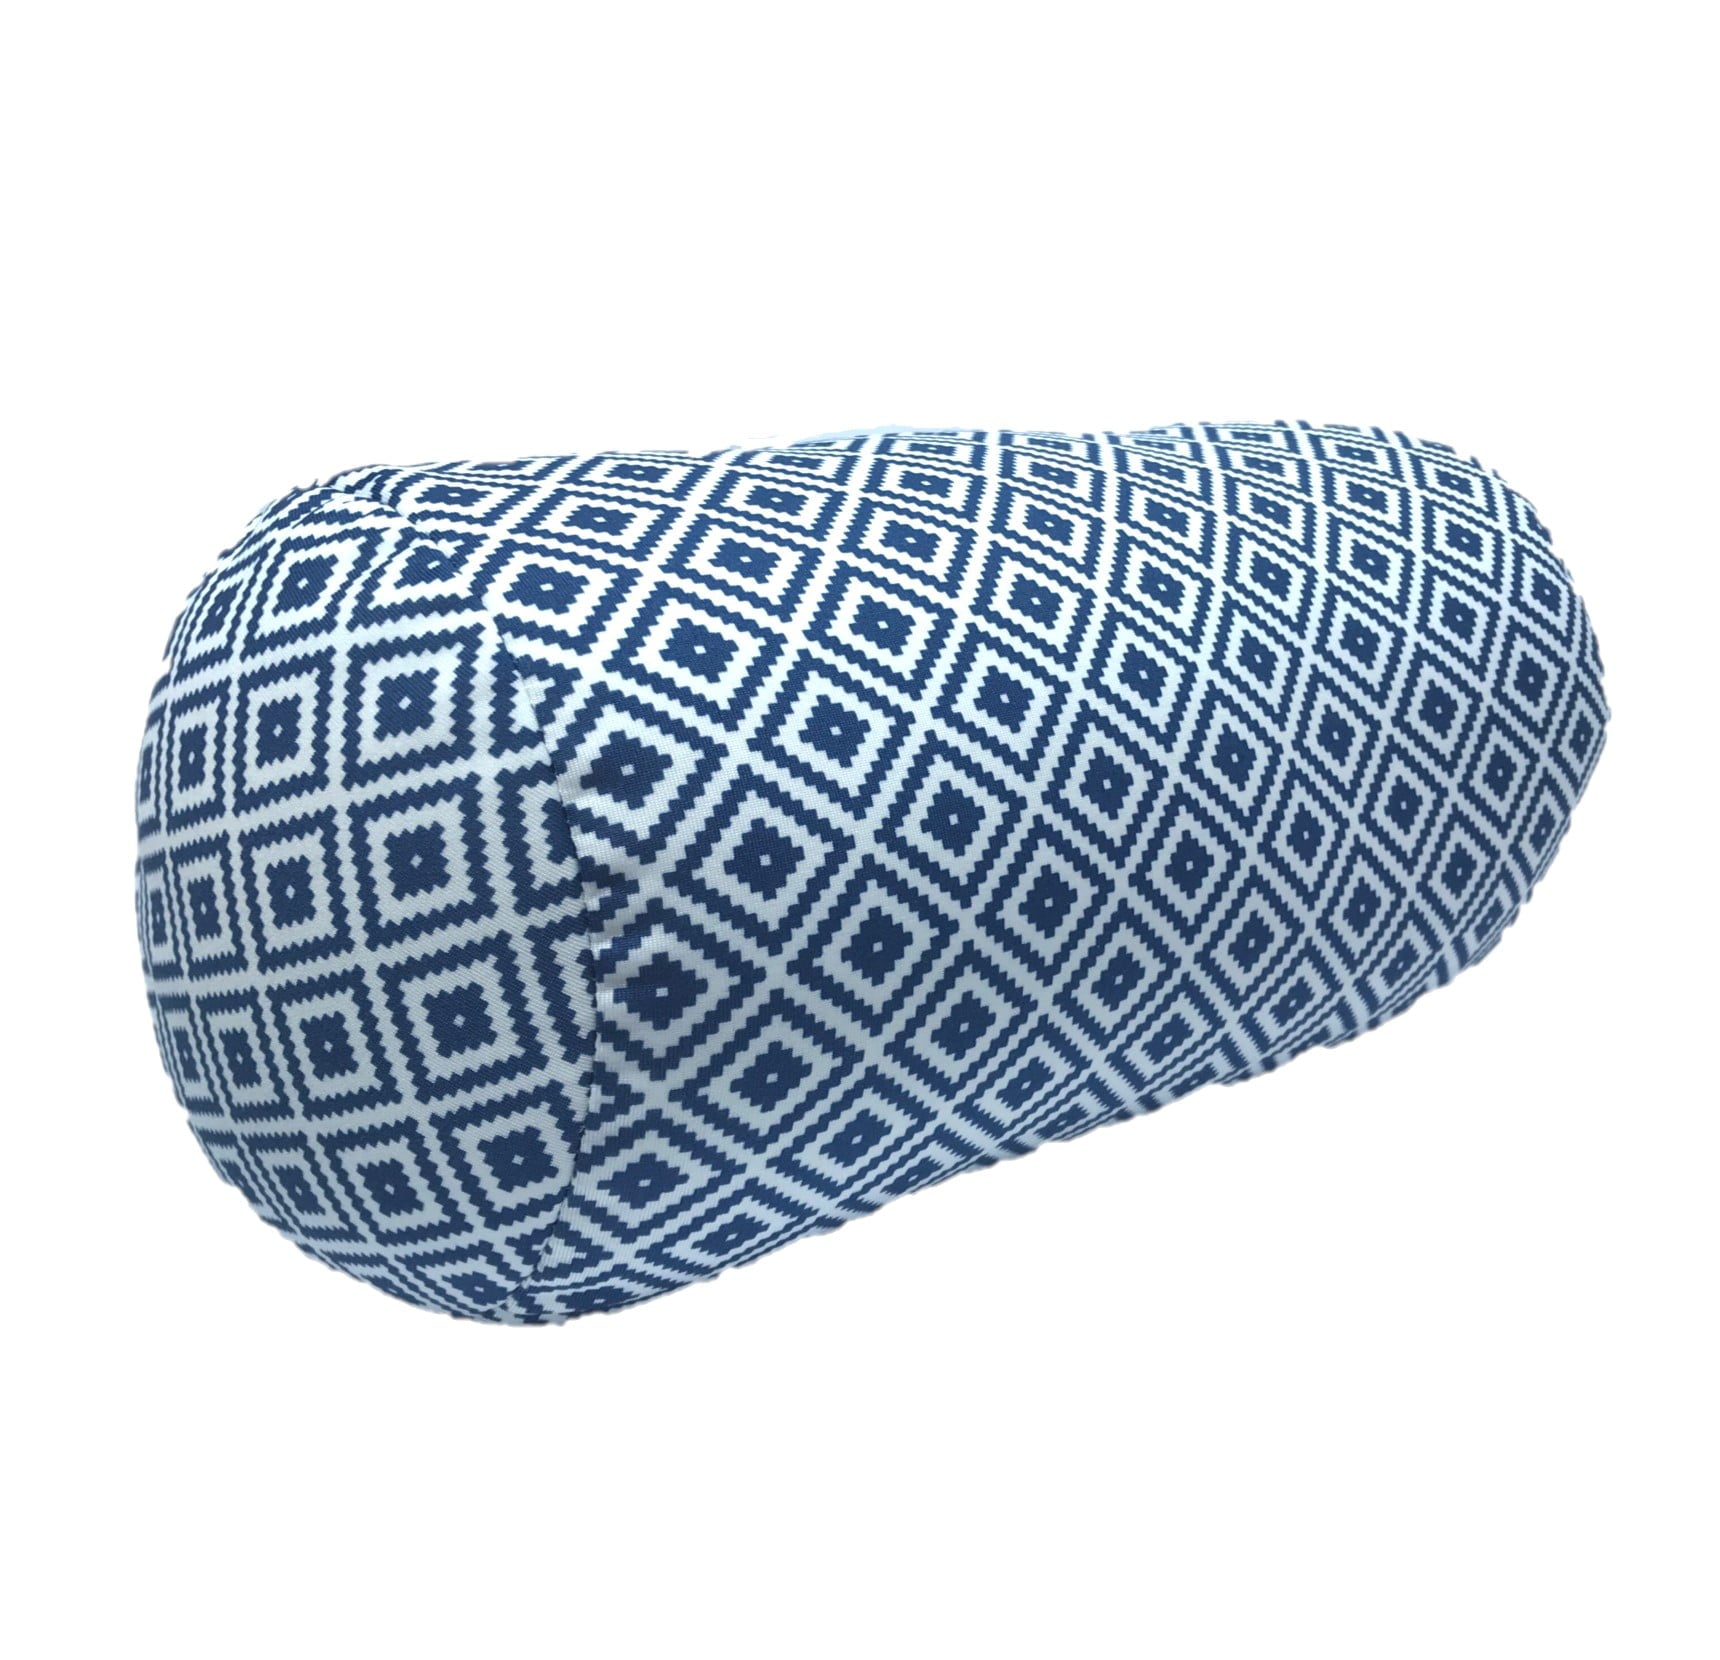 Bookishbunny Micro Bead Roll Squishy Cushion Hypoallergenic Post Surgery Back Neck Head Travel Pillow